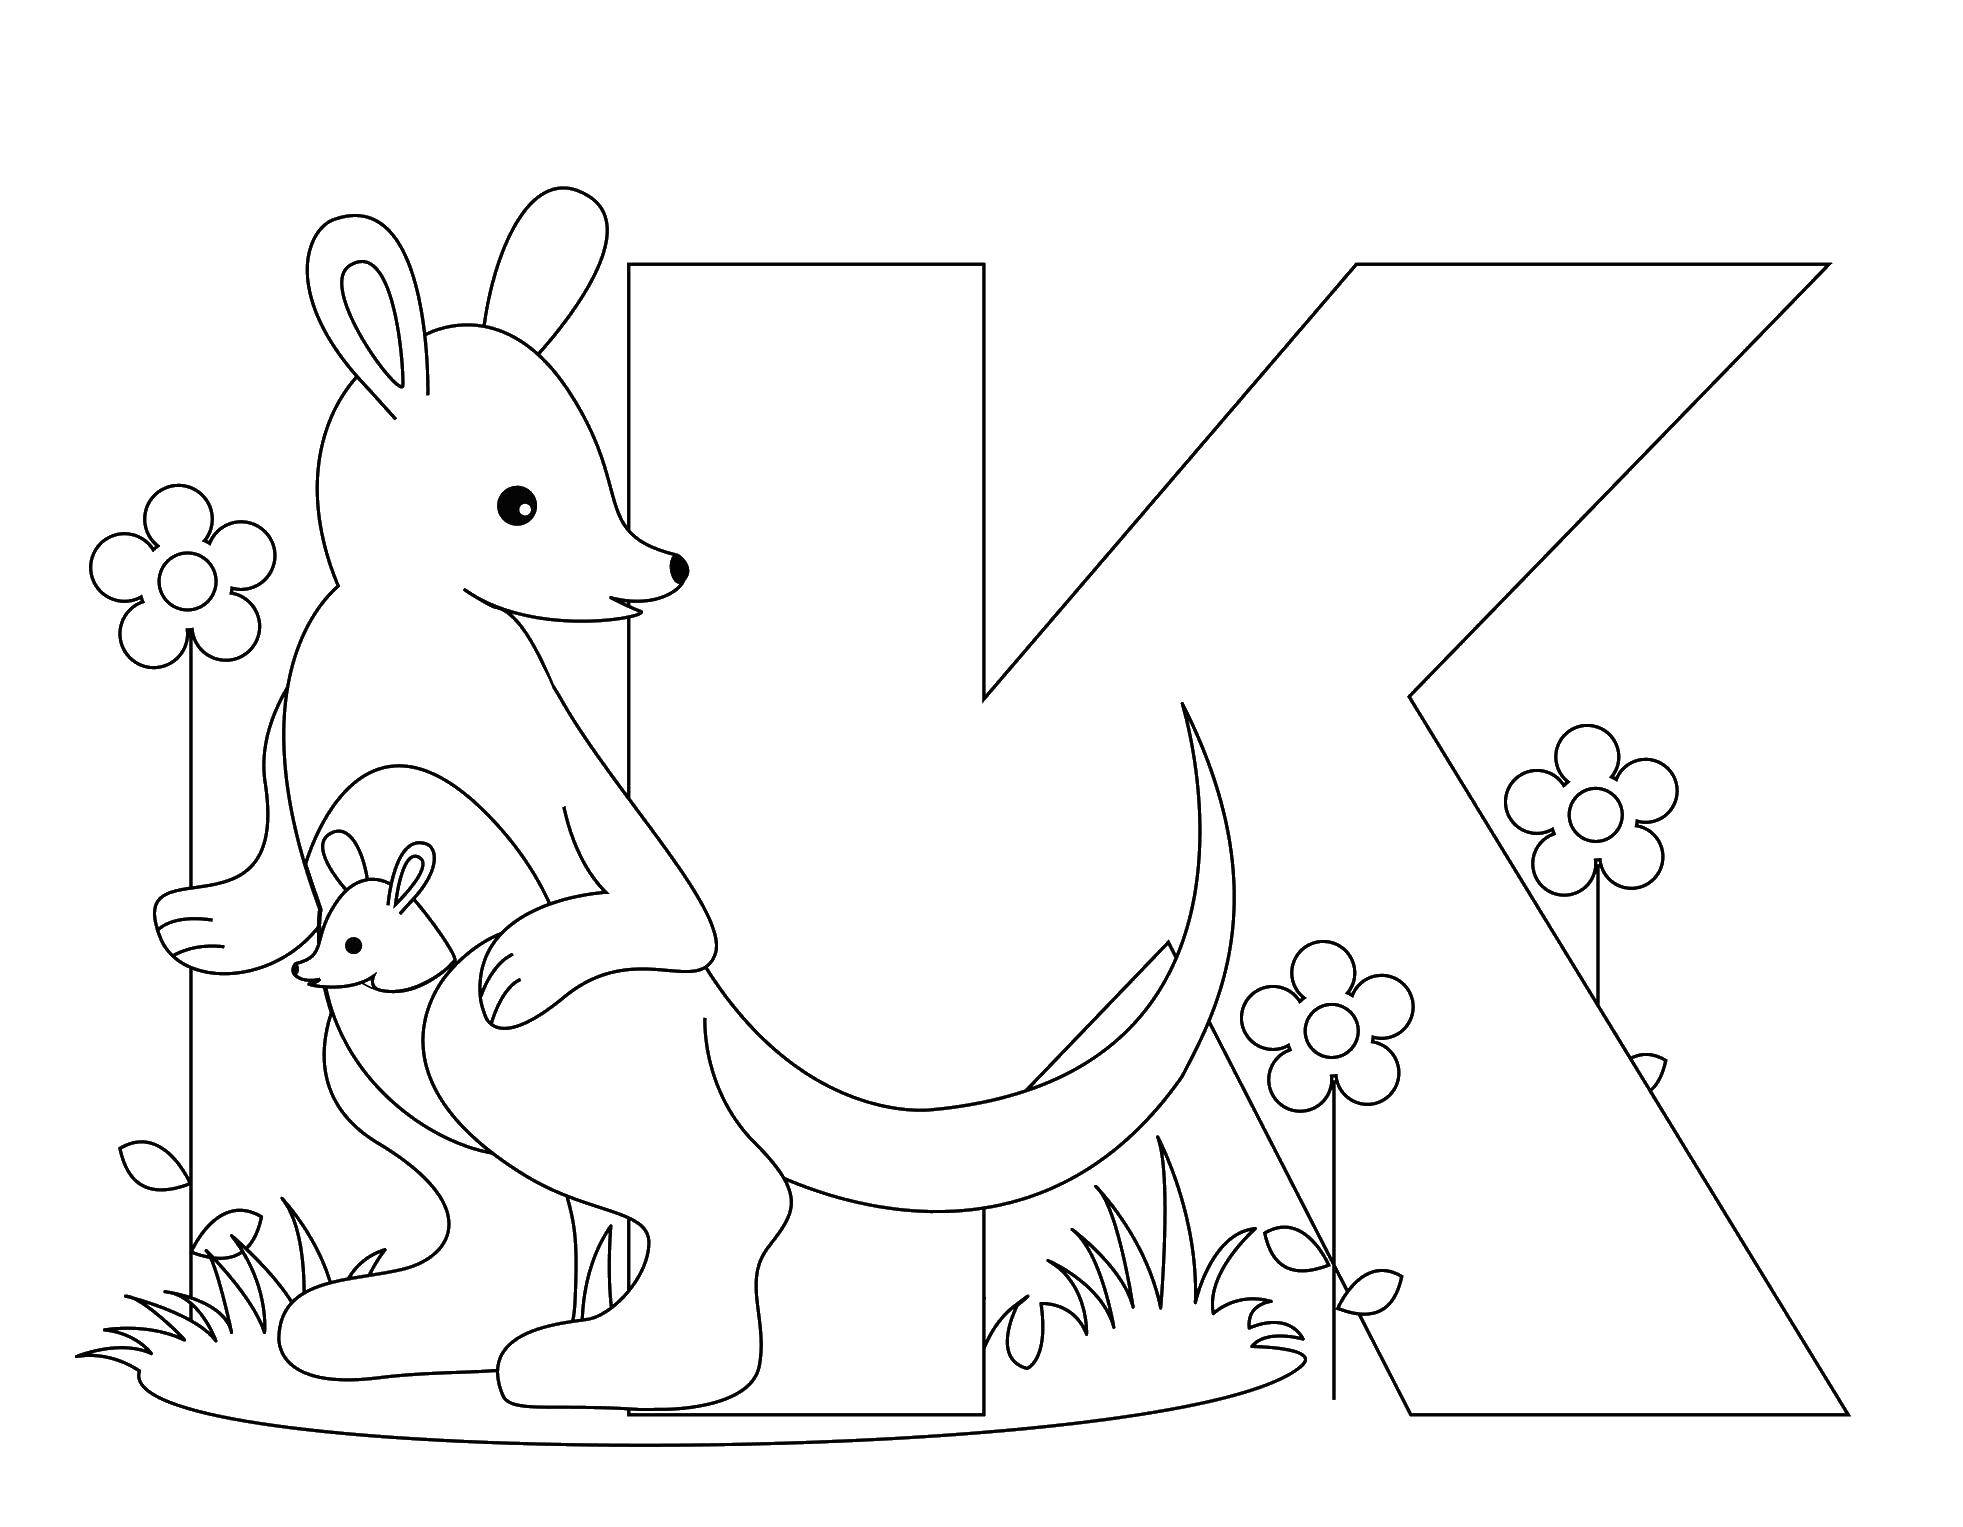 Coloring Kangaroo to. Category English alphabet. Tags:  The alphabet, letters, words.